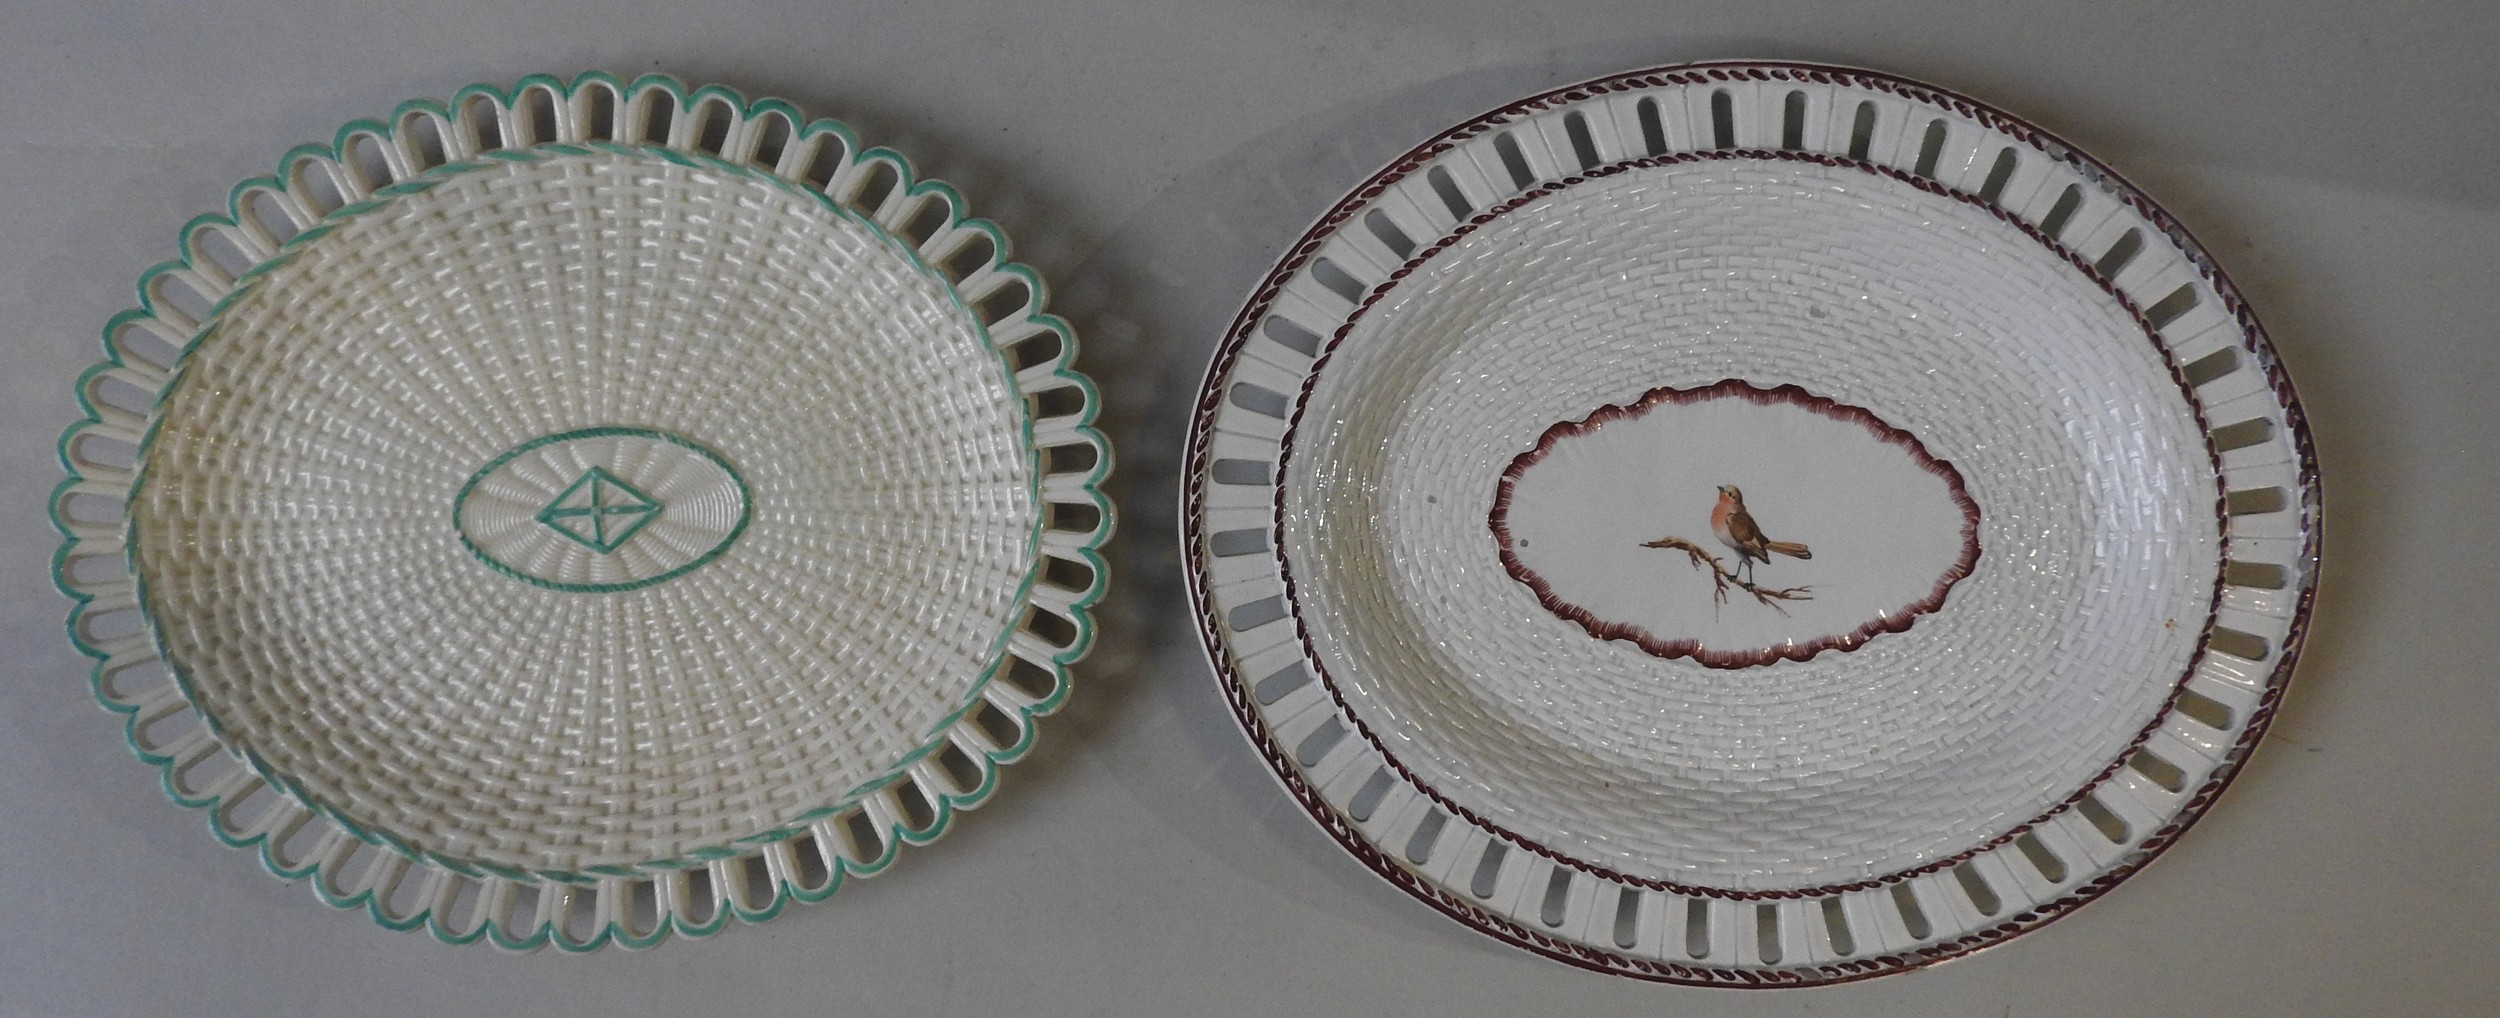 TWO RETICULATED CREAM WARE OVAL PLATTERS, EARLY 19TH CENTURY, one Wedgwood example with basket weave - Image 2 of 3